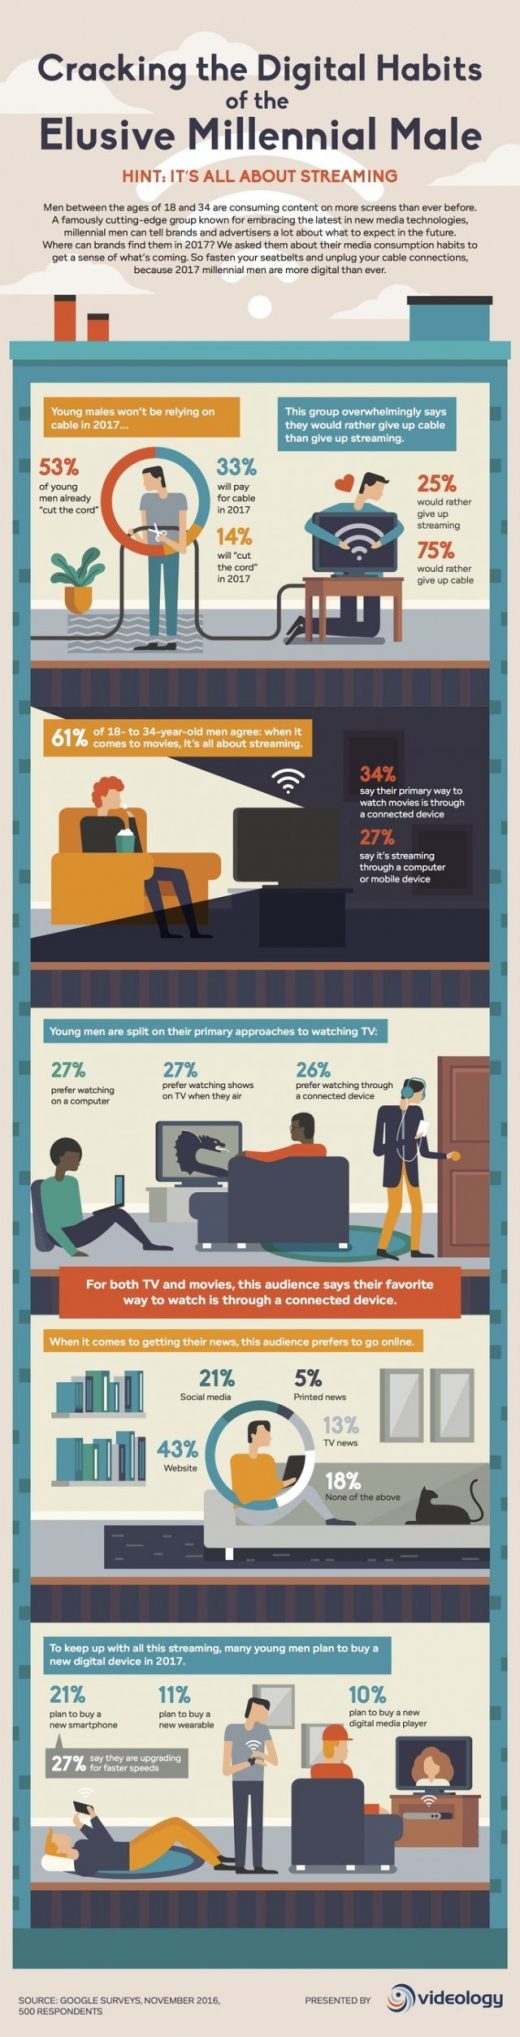 If You Force a Choice Between Cable & Streaming [Infographic]